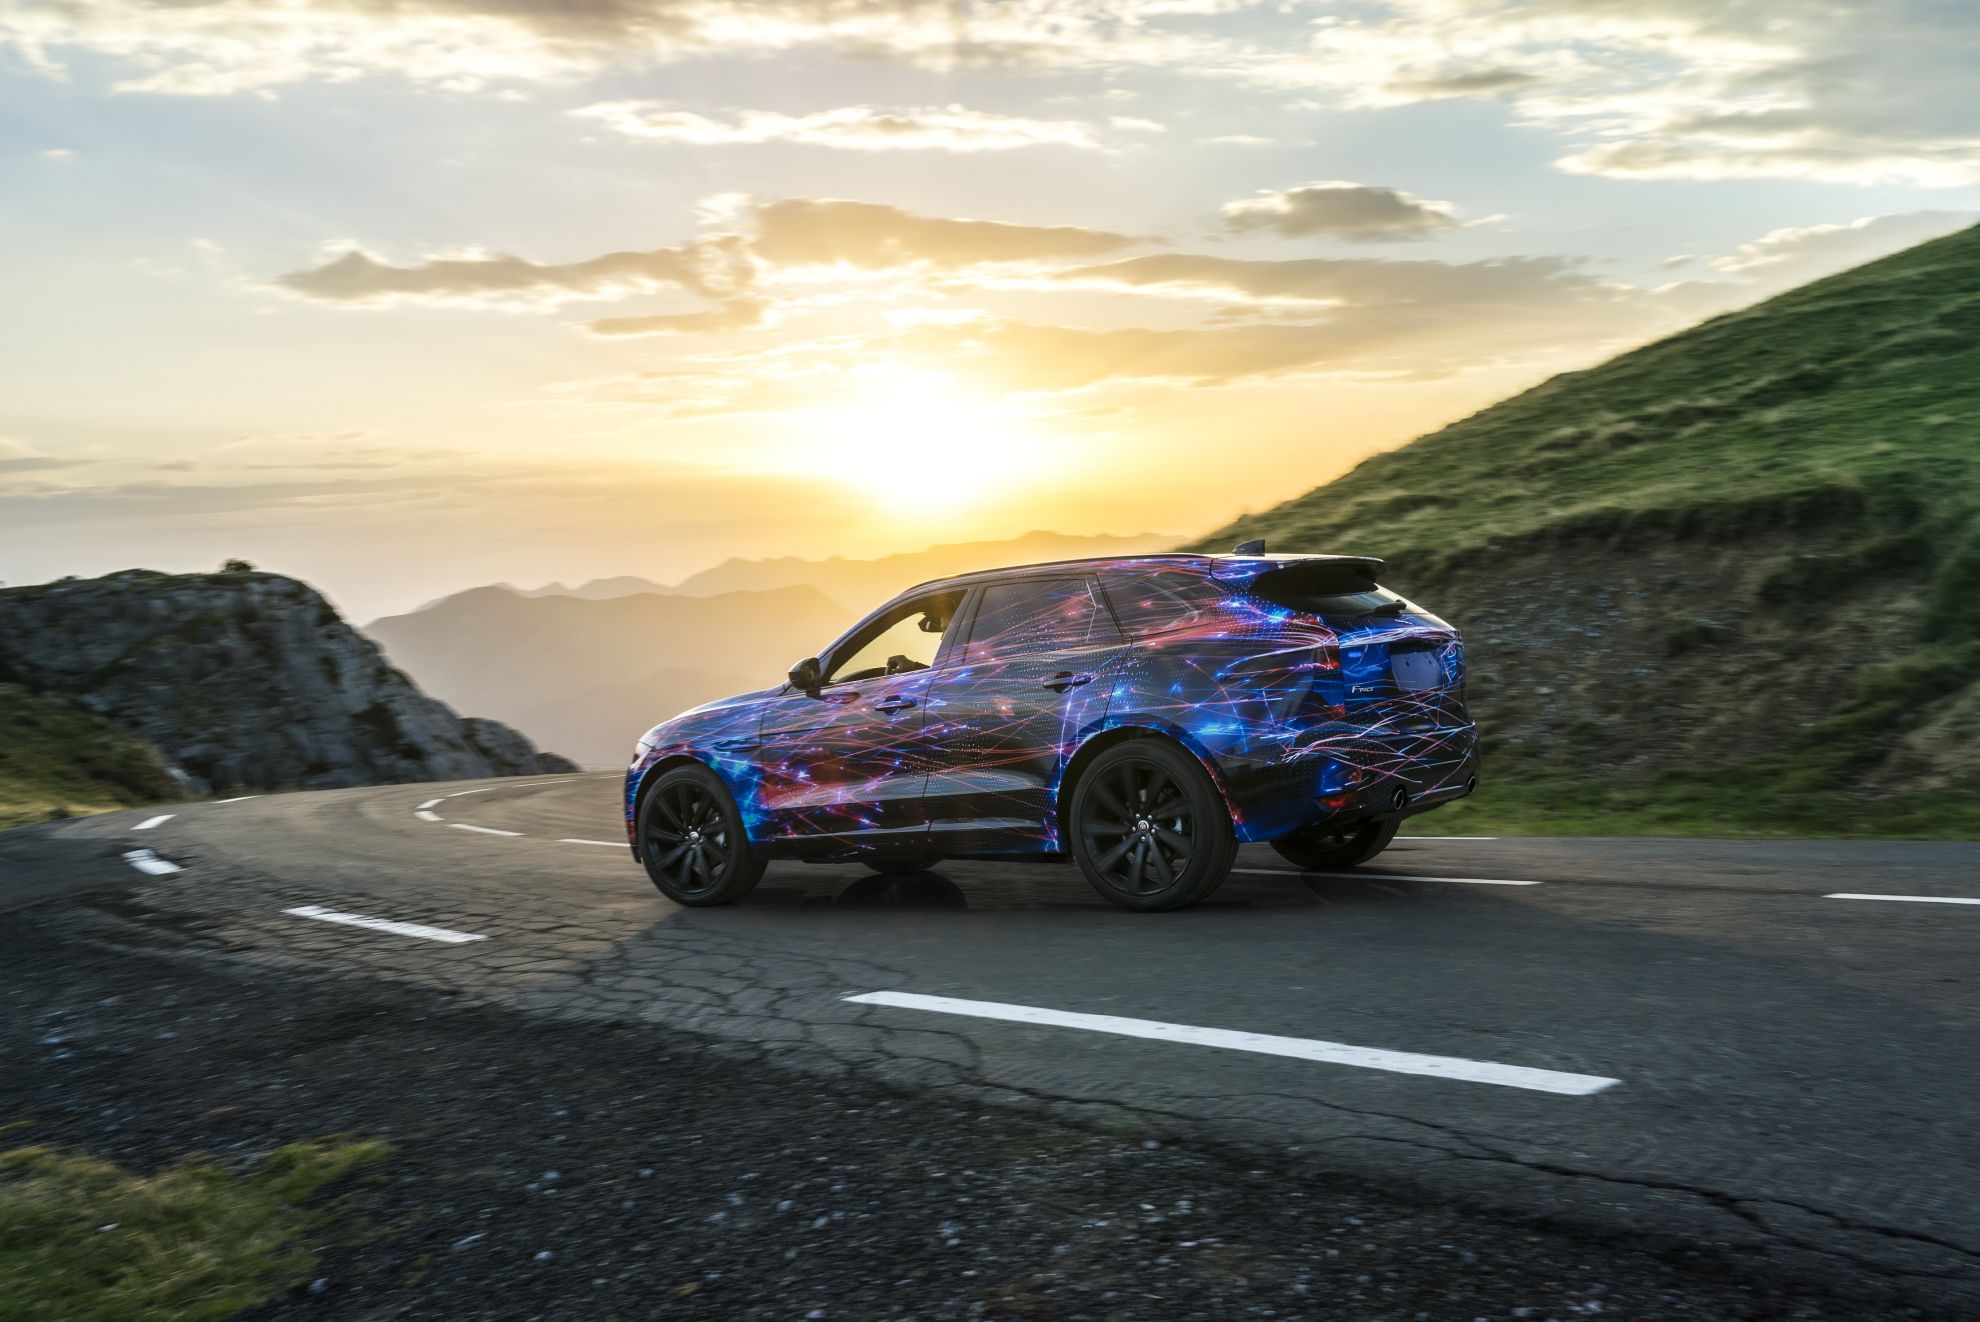 JAGUAR F-PACE SETS THE STANDARD FOR RIDE AND HANDLING